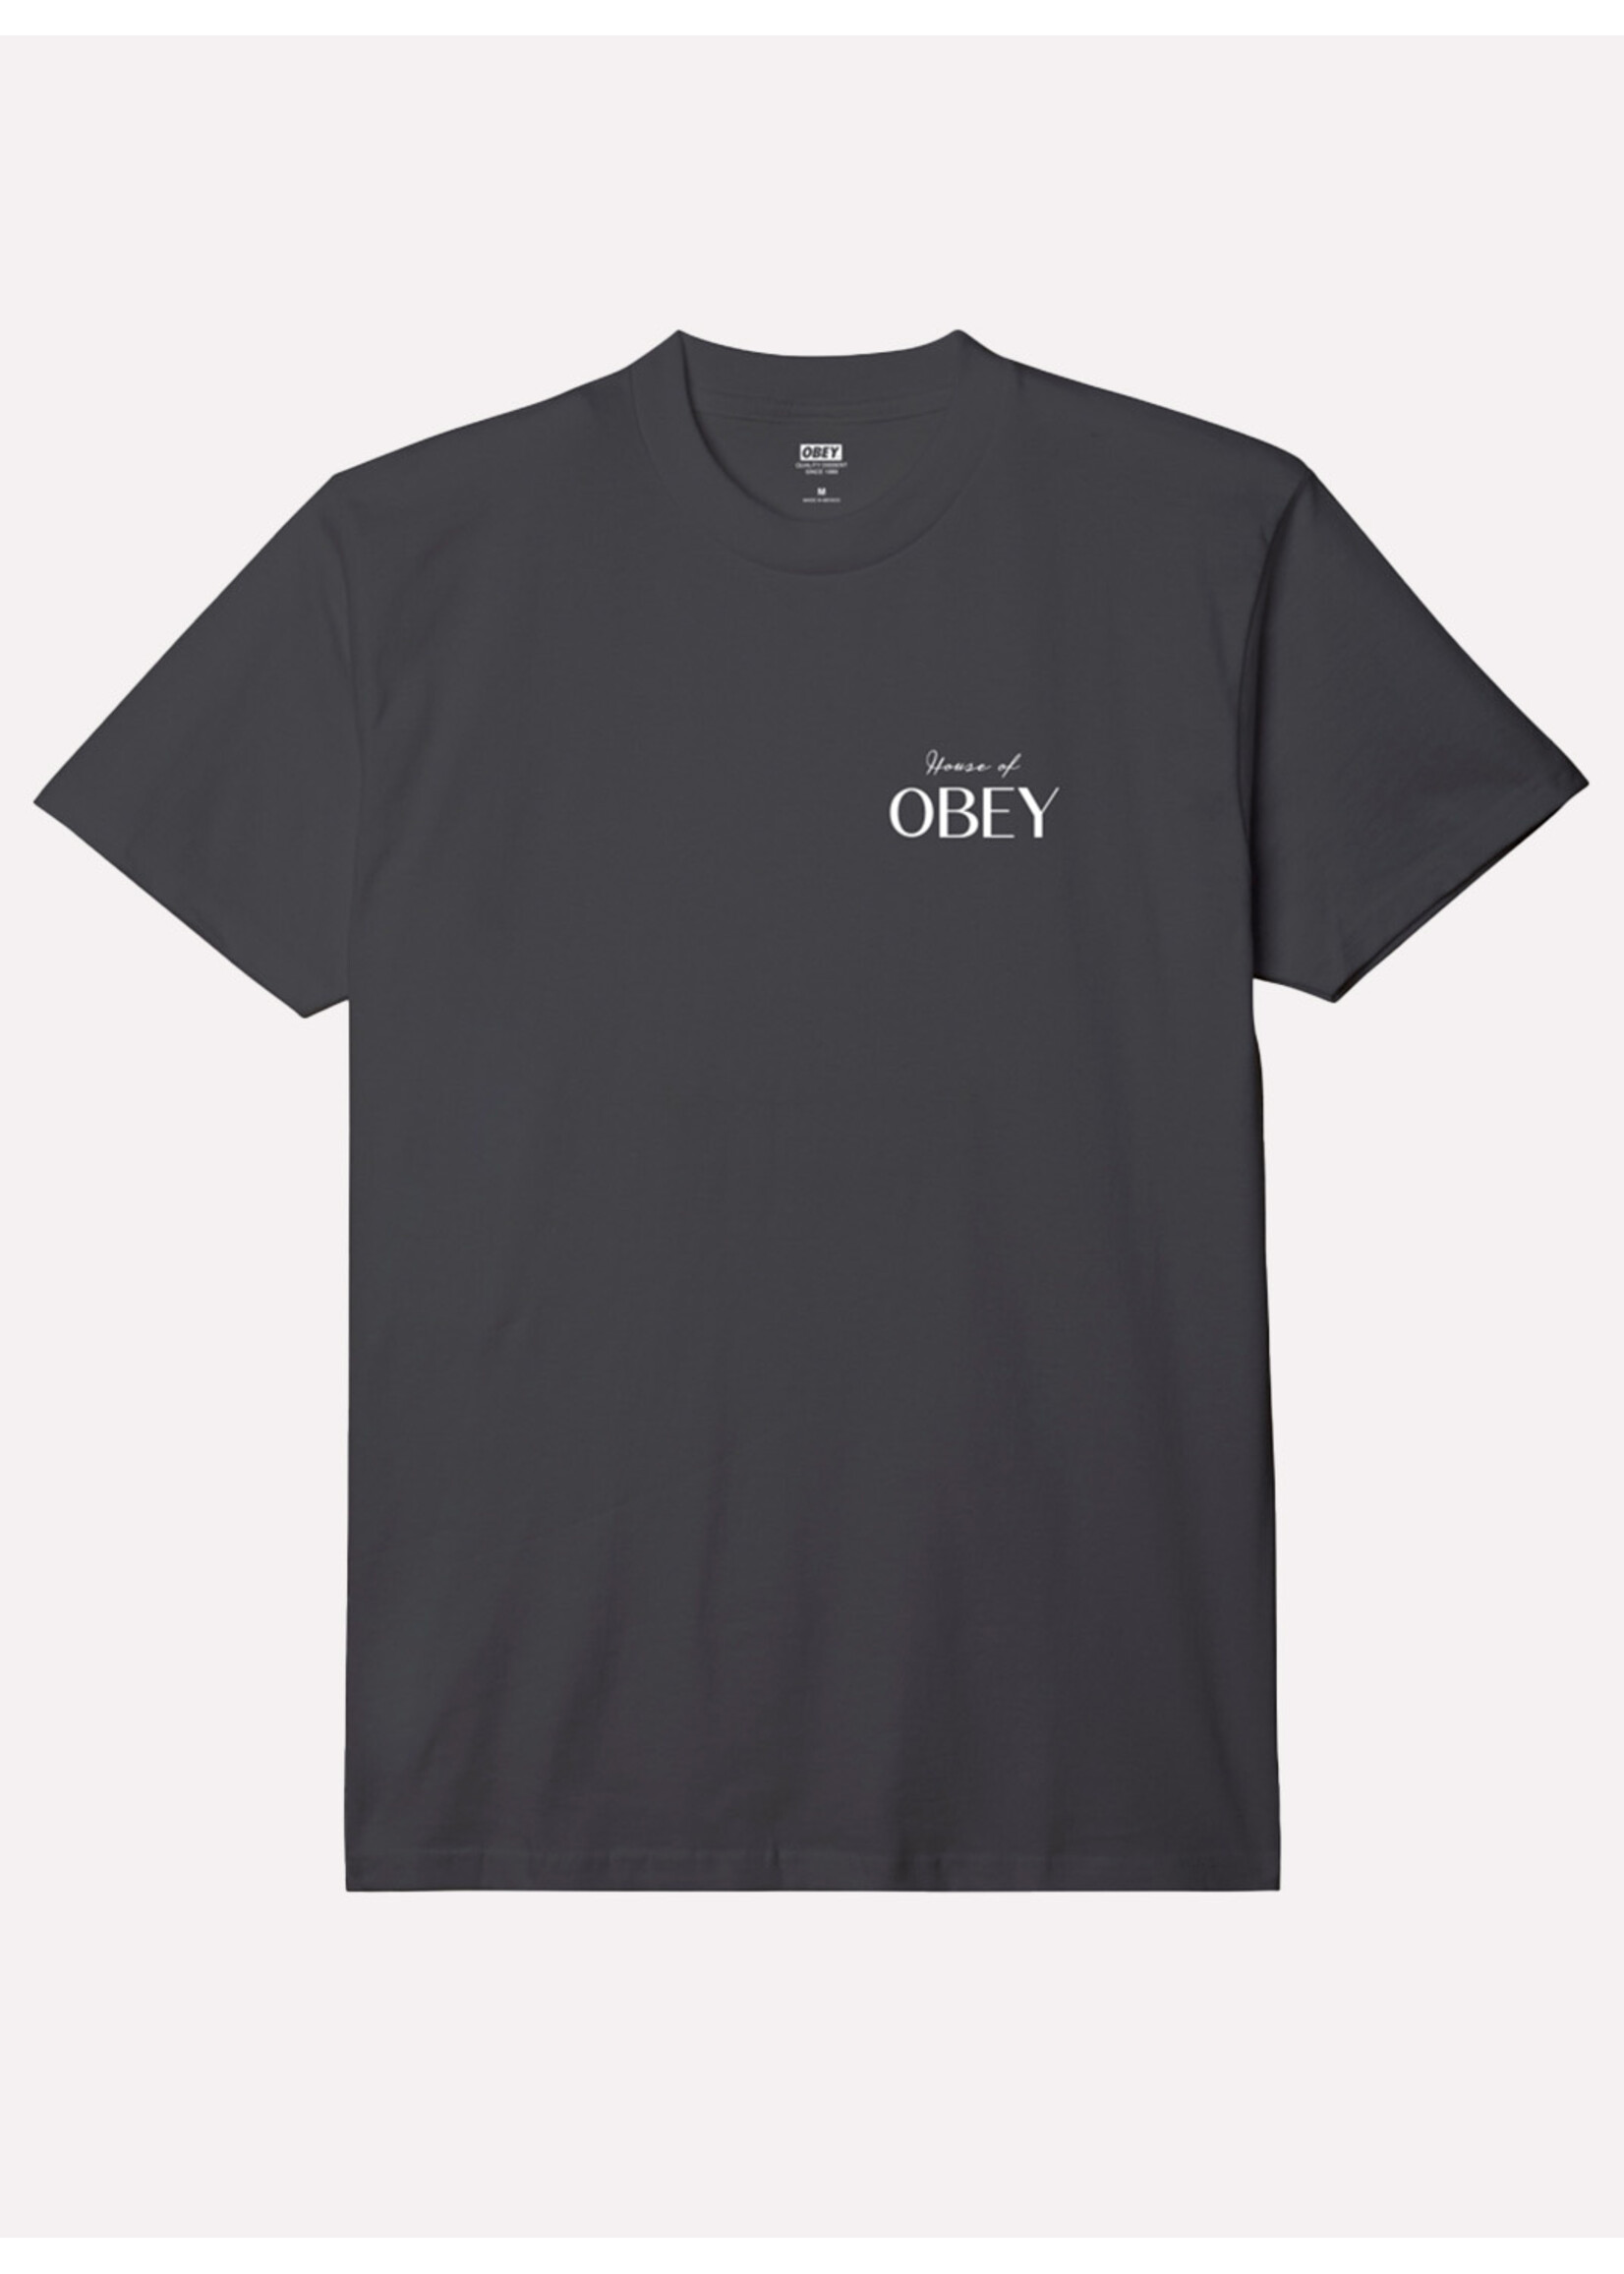 Obey House of Obey Tee Black 165263753-BLK